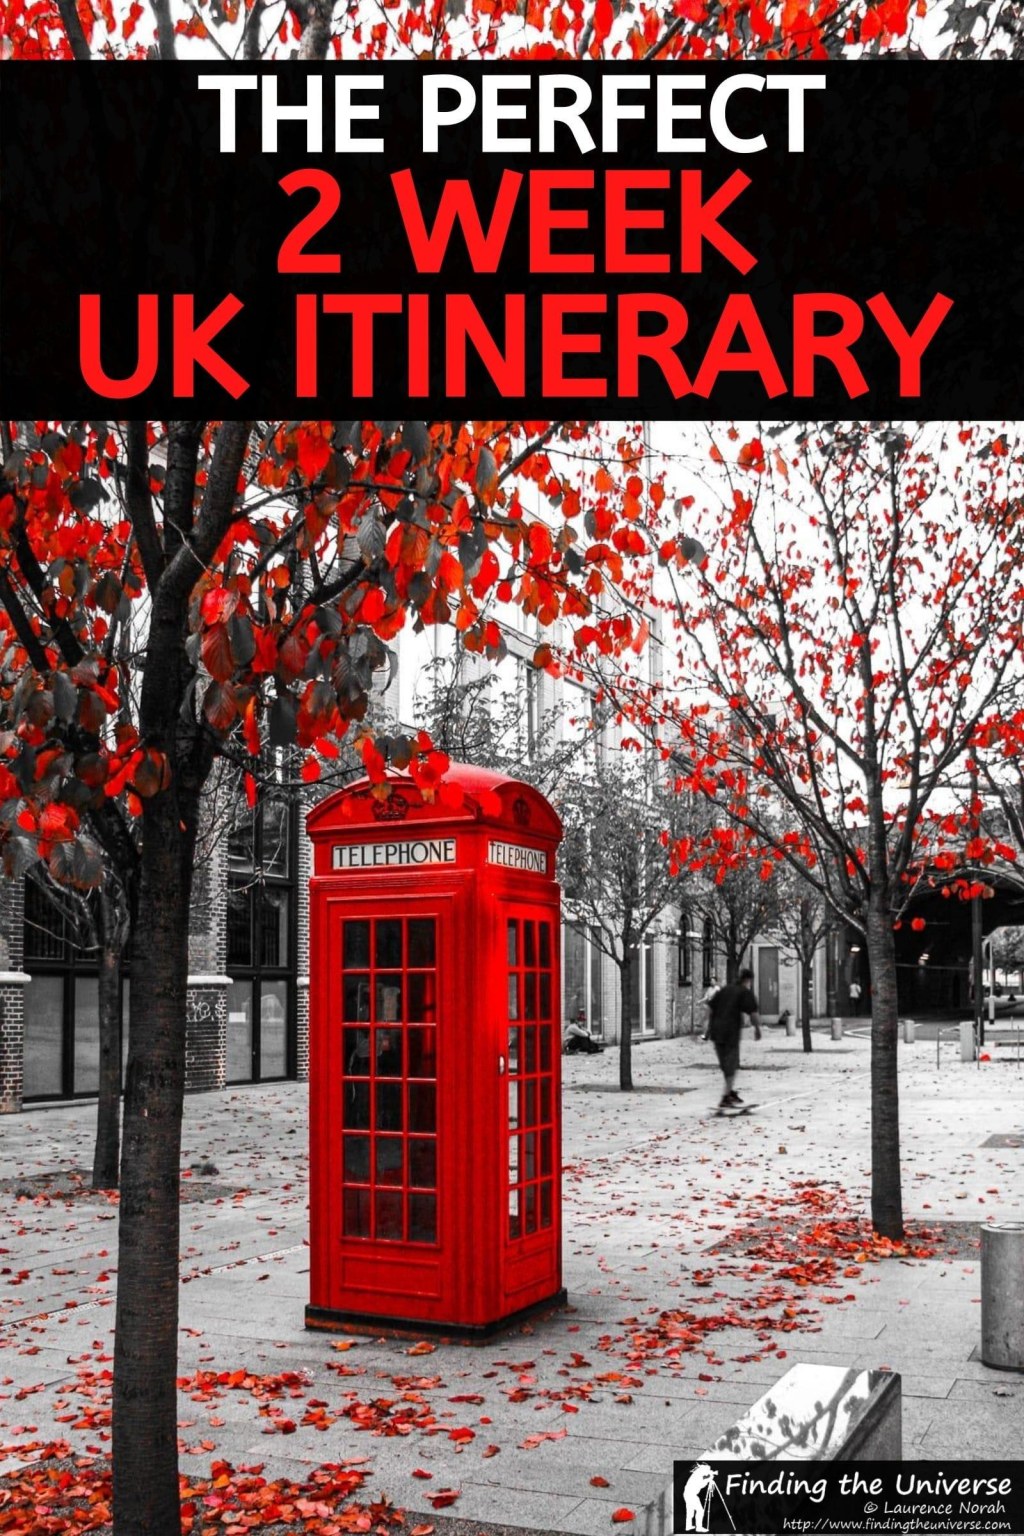 uk trip itinerary 2 weeks - Weeks in the UK – My Perfect UK Trip Itinerary - Finding the